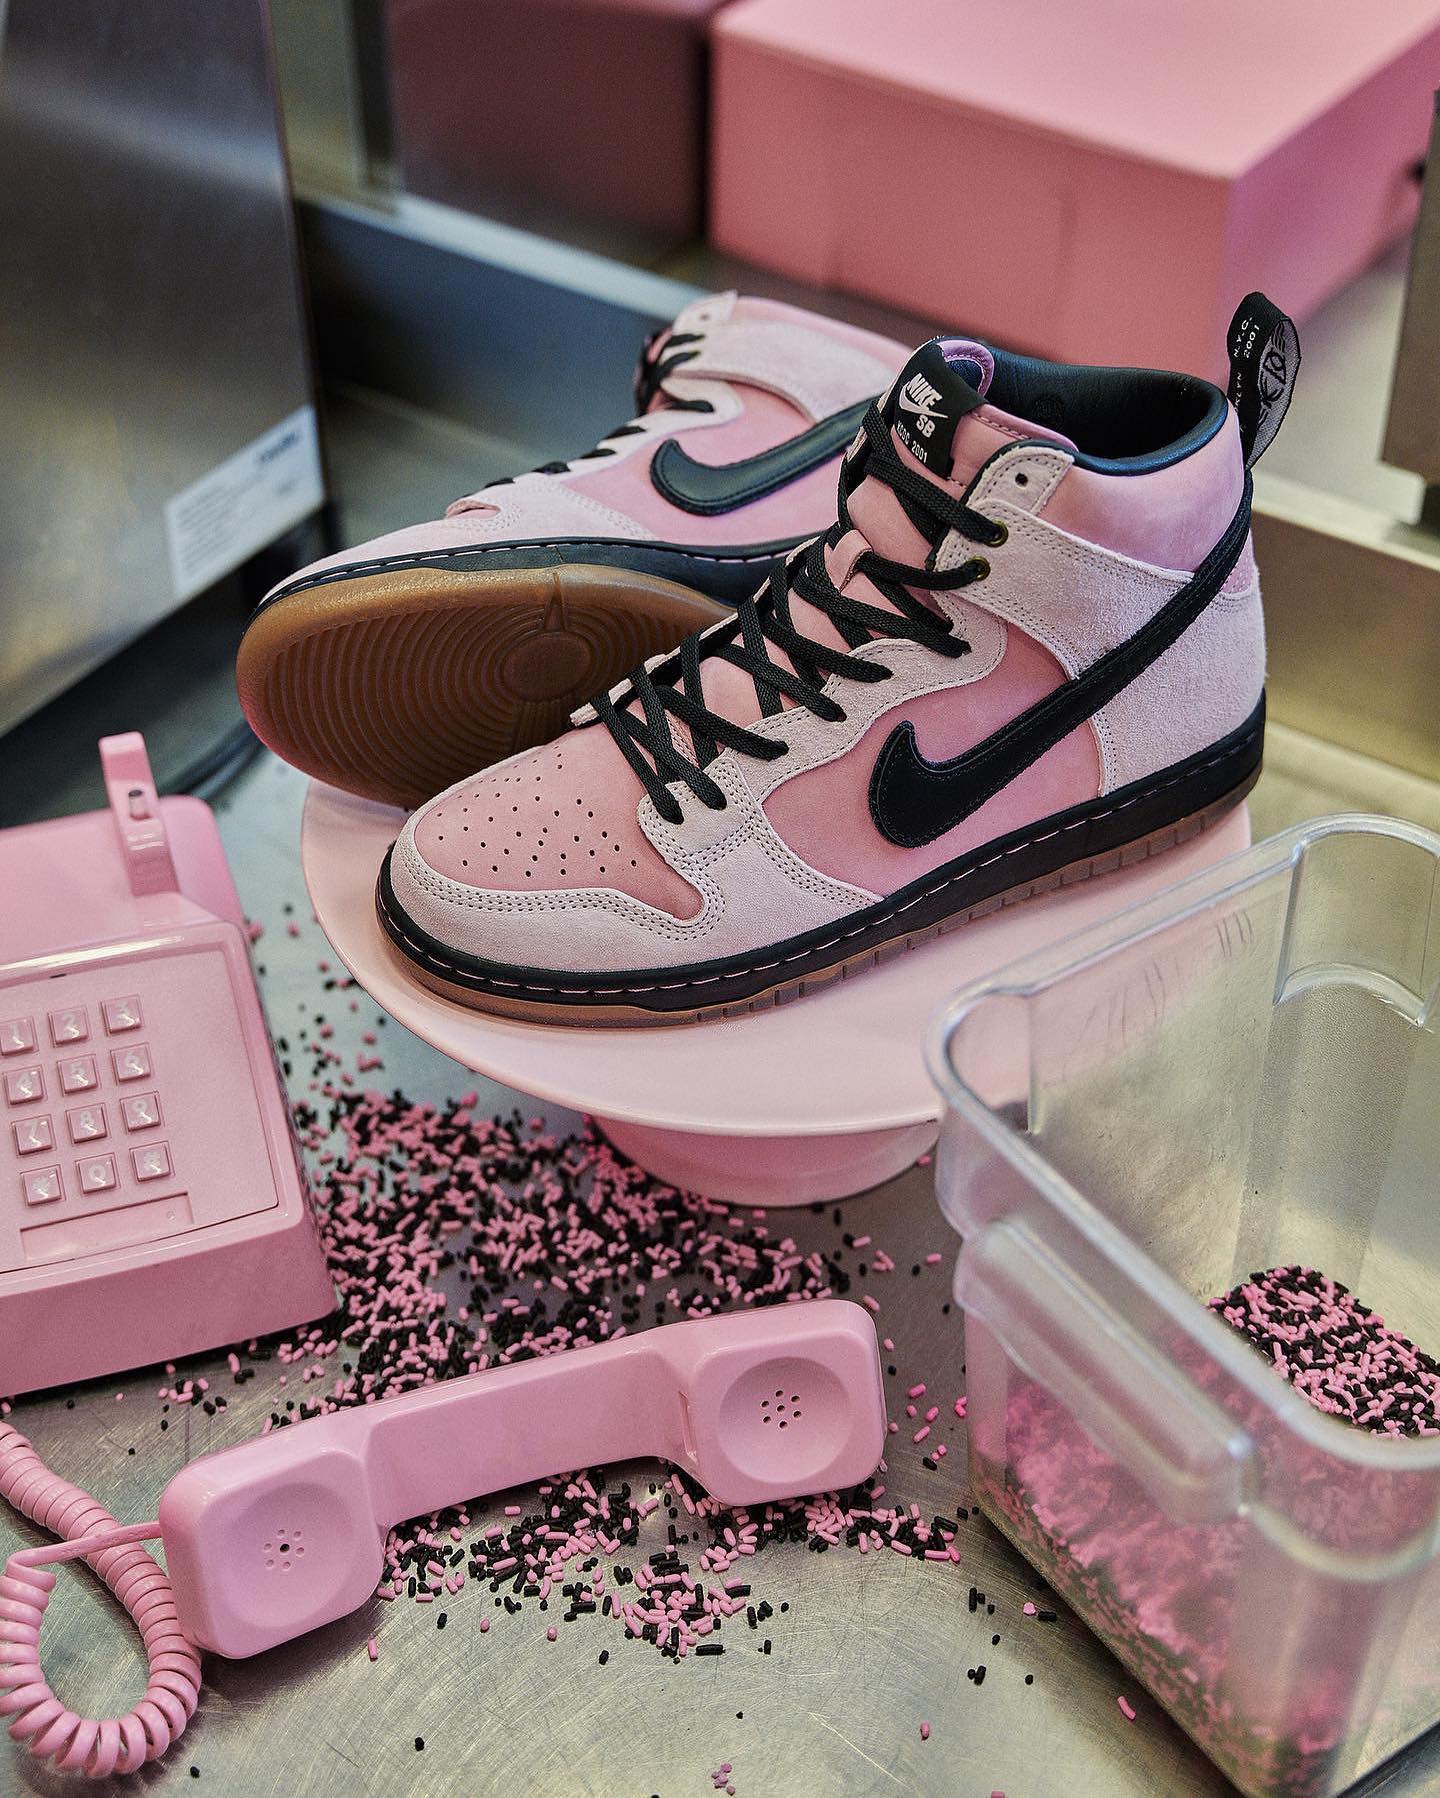 🧁🧁🧁Posted @withregram • @nikesb With the right ingredients baking for 20 years, @kcdcskateshop pulls an SB Dunk High out the oven raised to perfection. Rich pinks set the foundation while bold blacks hit the midsole, Swoosh, and liner. A clear gum outsole and oversized heel tab nod to NYC’s punk scene of years past.The SB Dunk High by KCDC is available Friday, April 29 at KCDC and Saturday, April 30 exclusively in select skate shops. Learn more at  in @nikesb bio.